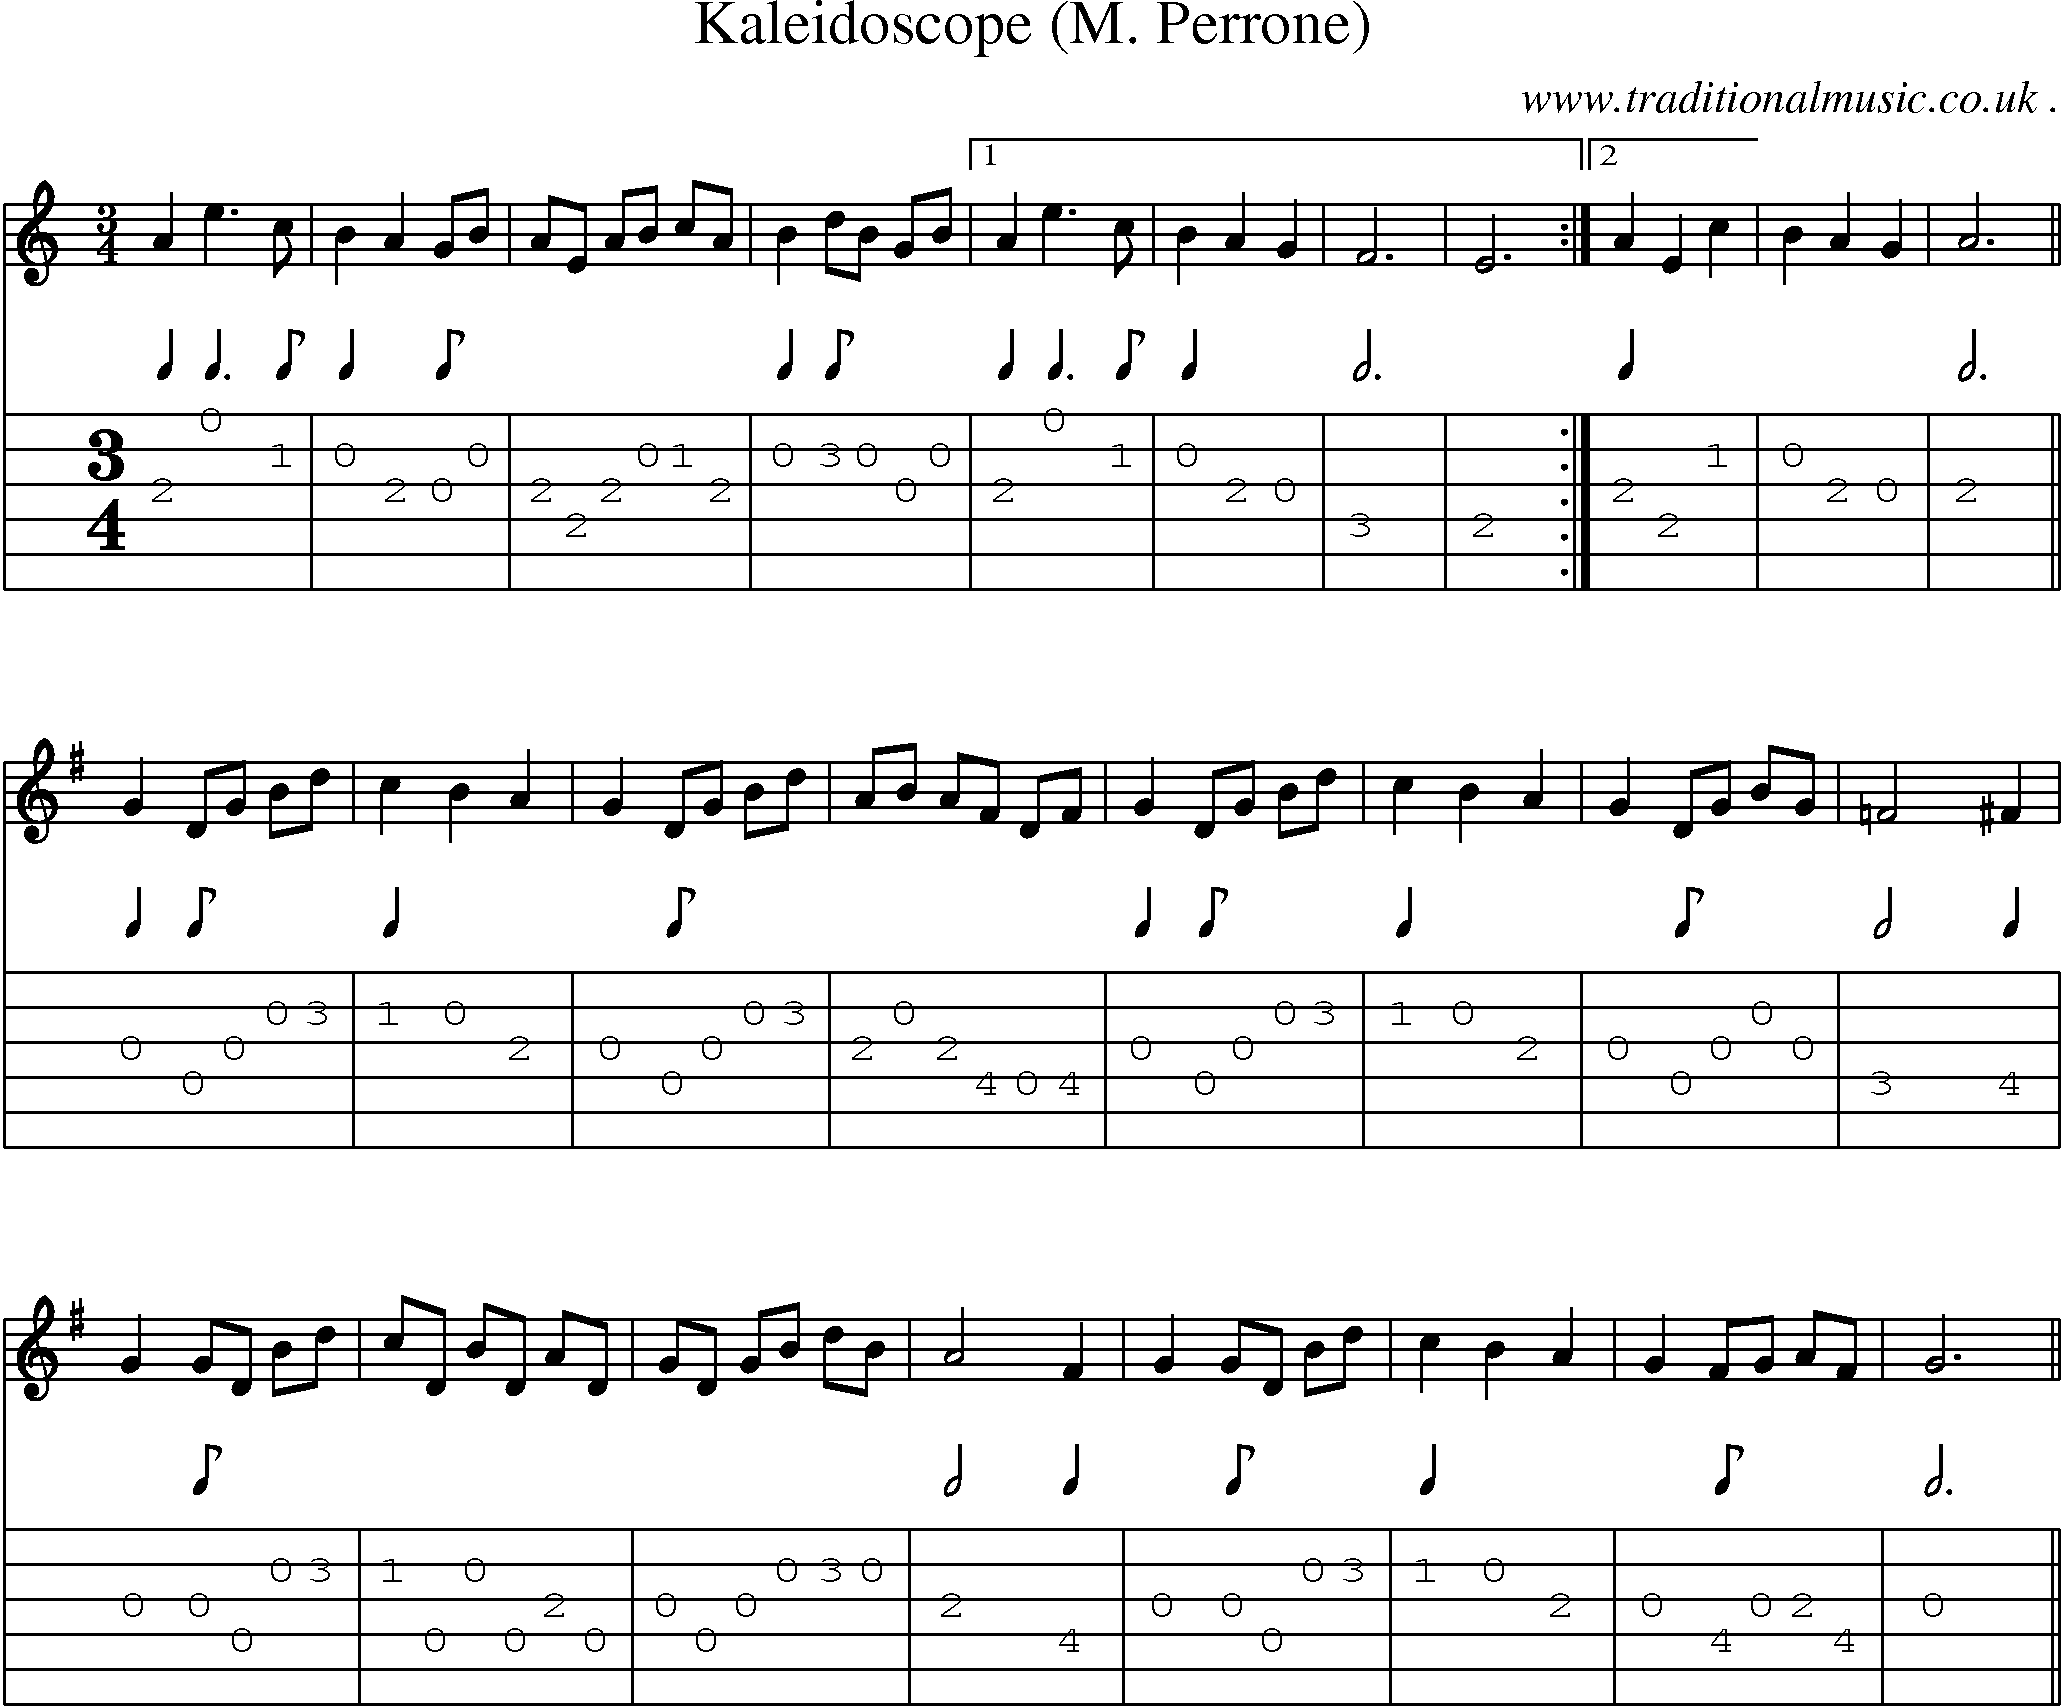 Sheet-Music and Guitar Tabs for Kaleidoscope (m Perrone)